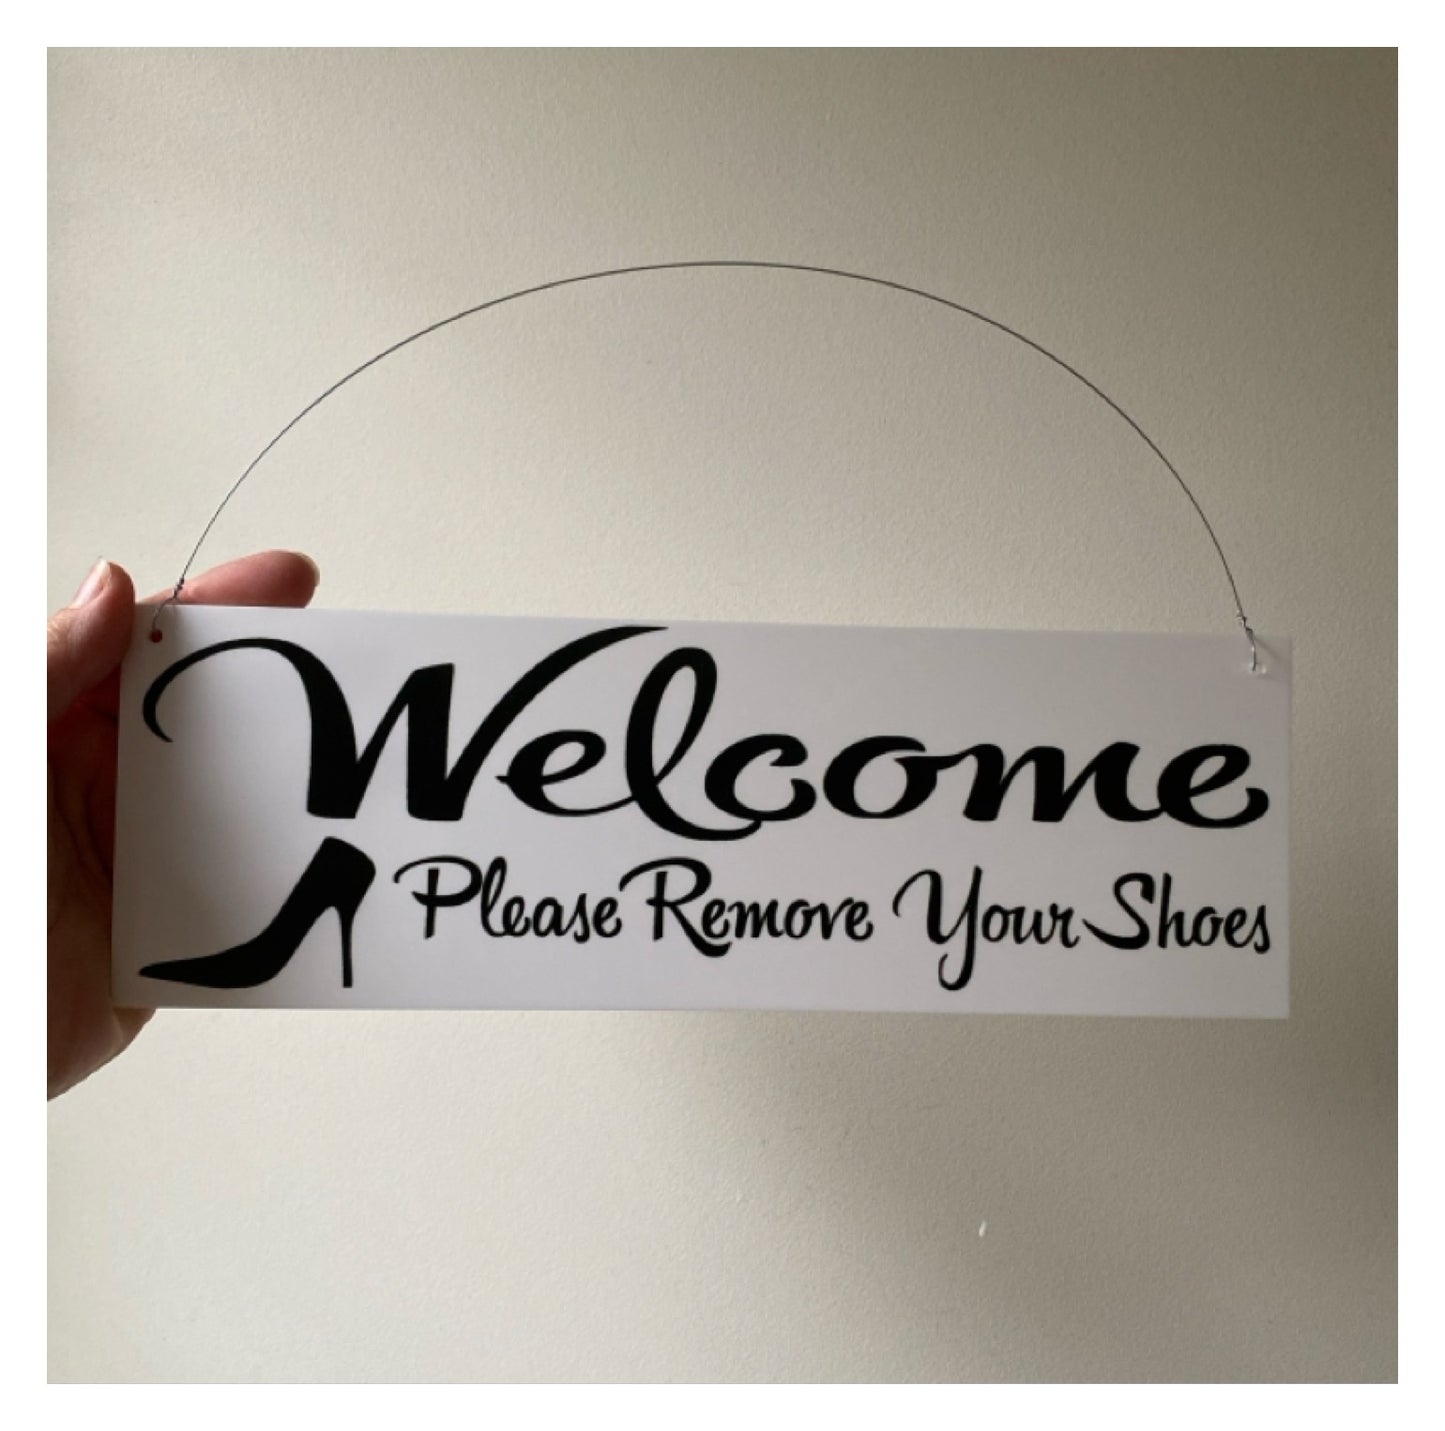 Welcome Please Remove Your Shoes Sign - The Renmy Store Homewares & Gifts 